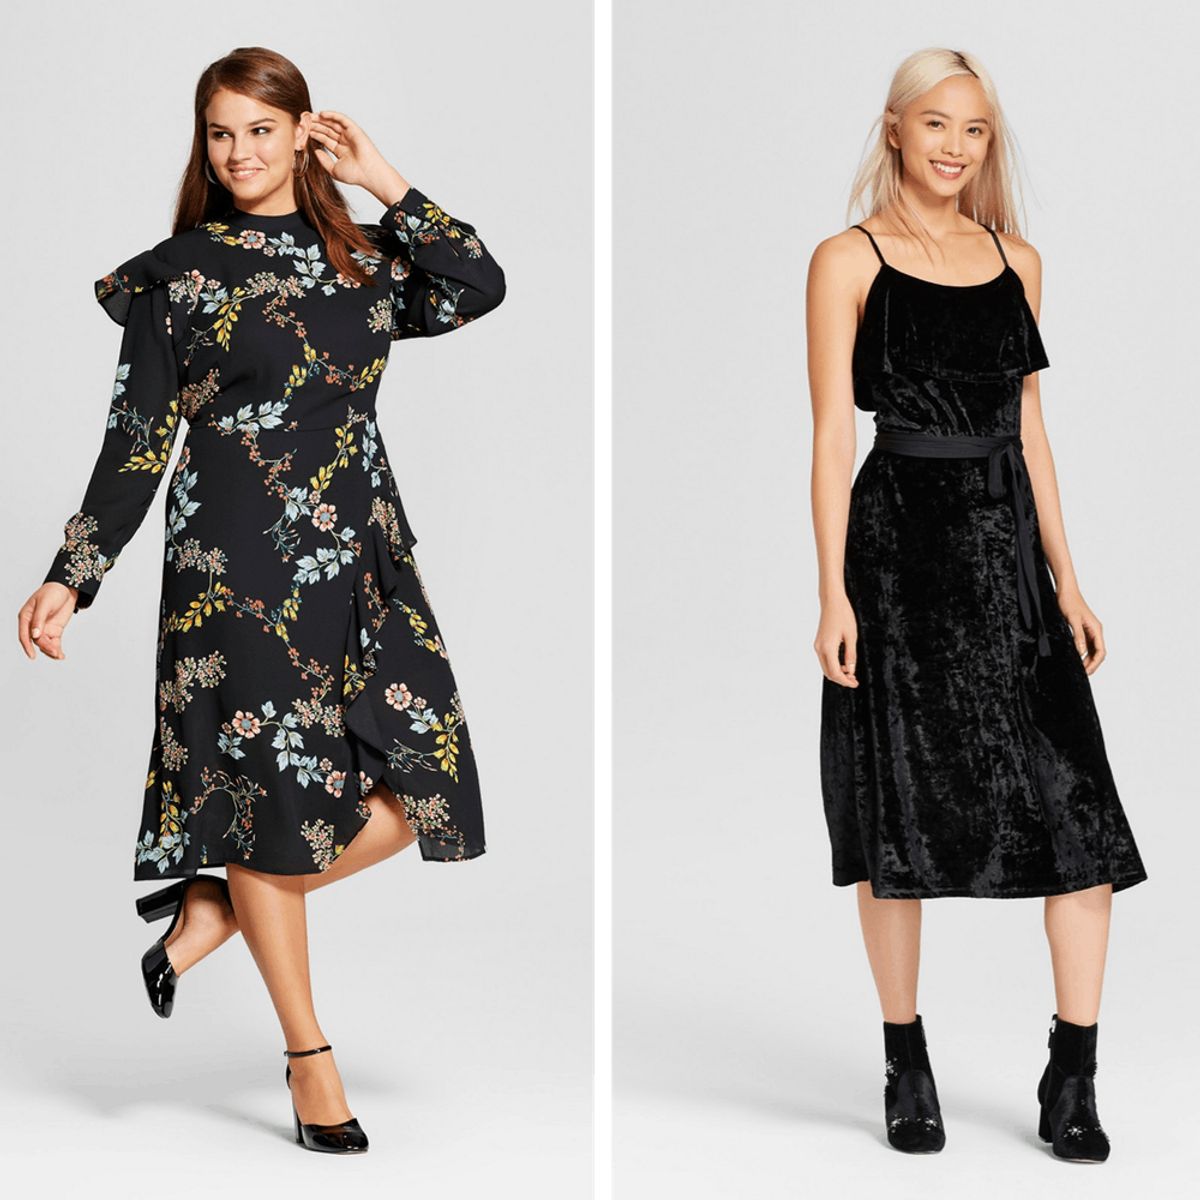 Who What Wear’s December Collection for Target Is Here